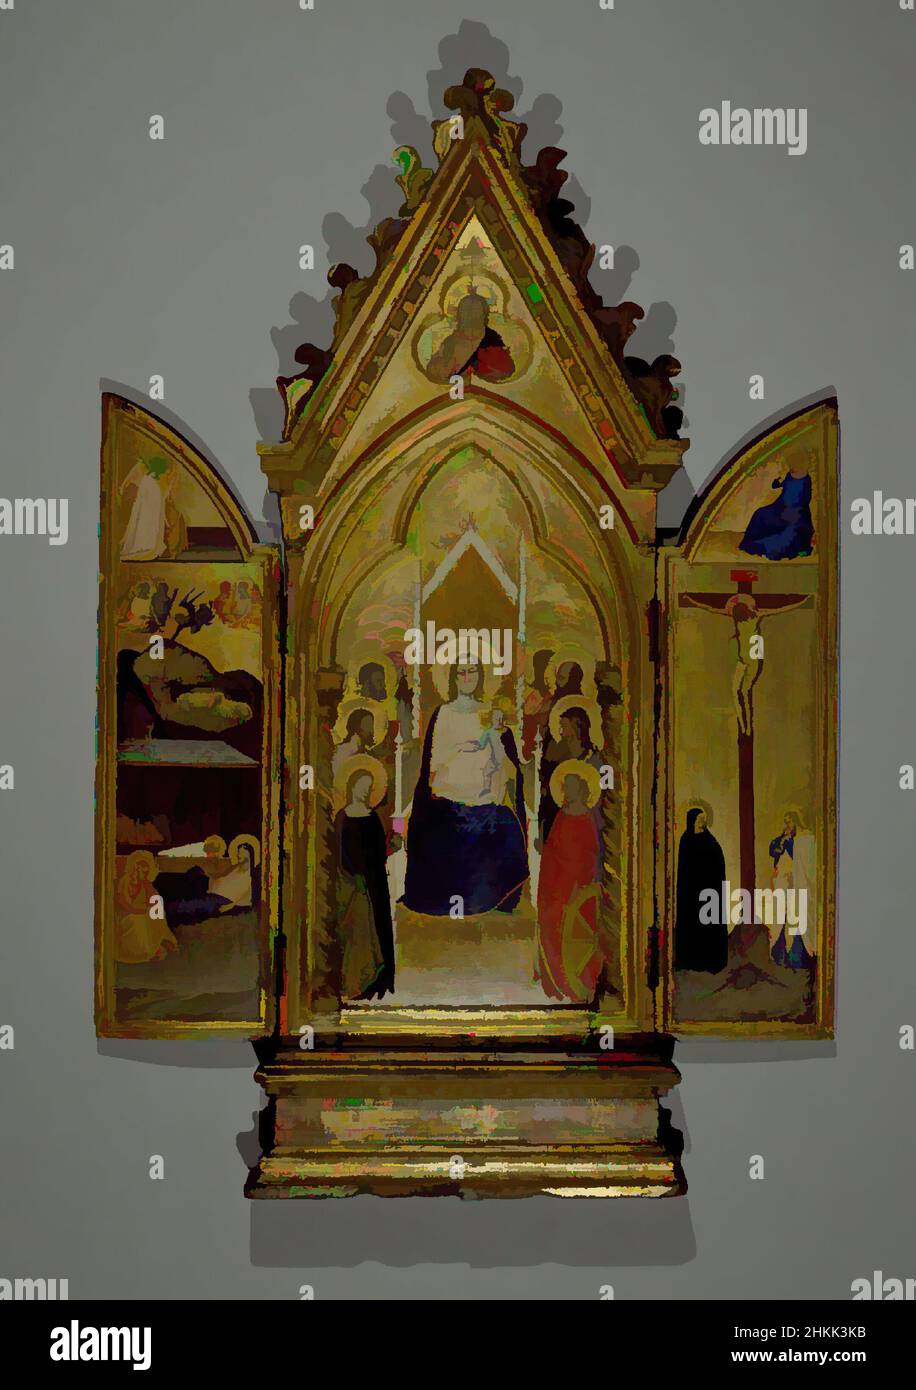 Art inspired by Triptych: Madonna with Saints and Christ Blessing, Center; The Nativity and the Annunciate Angel, Left Wing; Crucifixion and the Virgin Annunciate, Right Wing, Maso di Banco, Italian, Florentine School, 1341-1346, Tempera and tooled gold on poplar panel in original, Classic works modernized by Artotop with a splash of modernity. Shapes, color and value, eye-catching visual impact on art. Emotions through freedom of artworks in a contemporary way. A timeless message pursuing a wildly creative new direction. Artists turning to the digital medium and creating the Artotop NFT Stock Photo